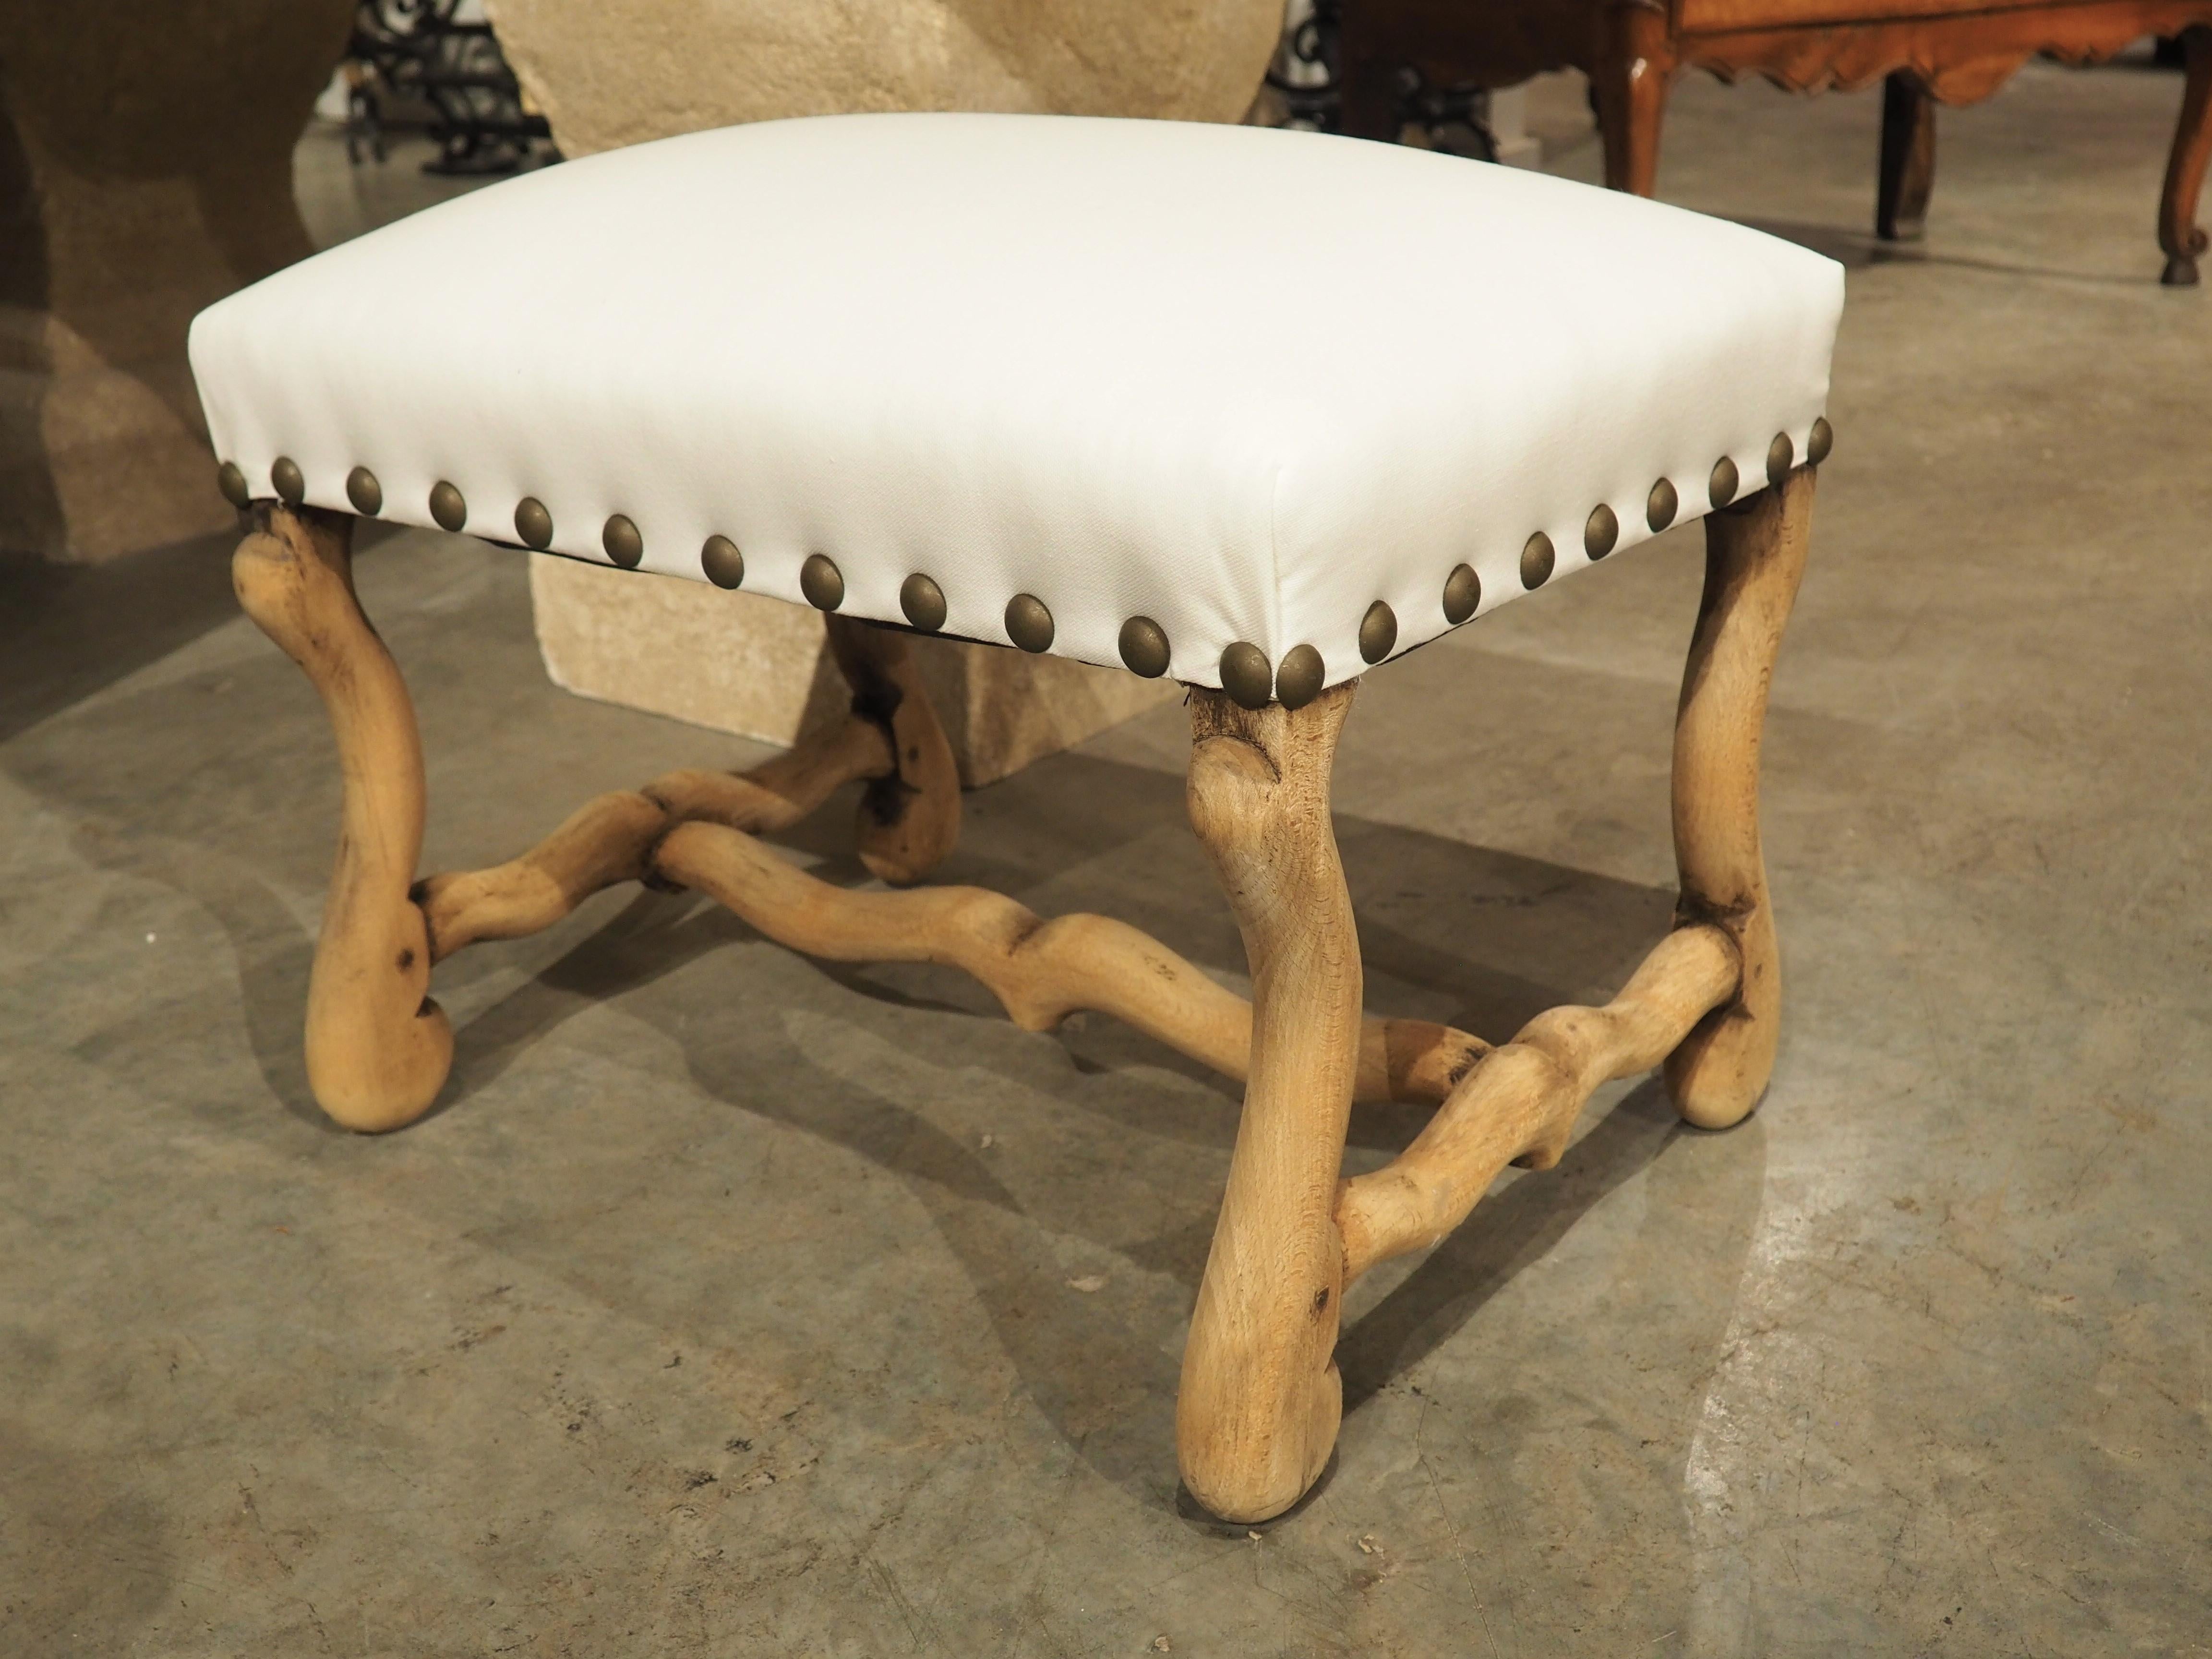 Bleached French Os De Mouton Tabouret Stool, White Cotton Upholstery, C. 1900 For Sale 5